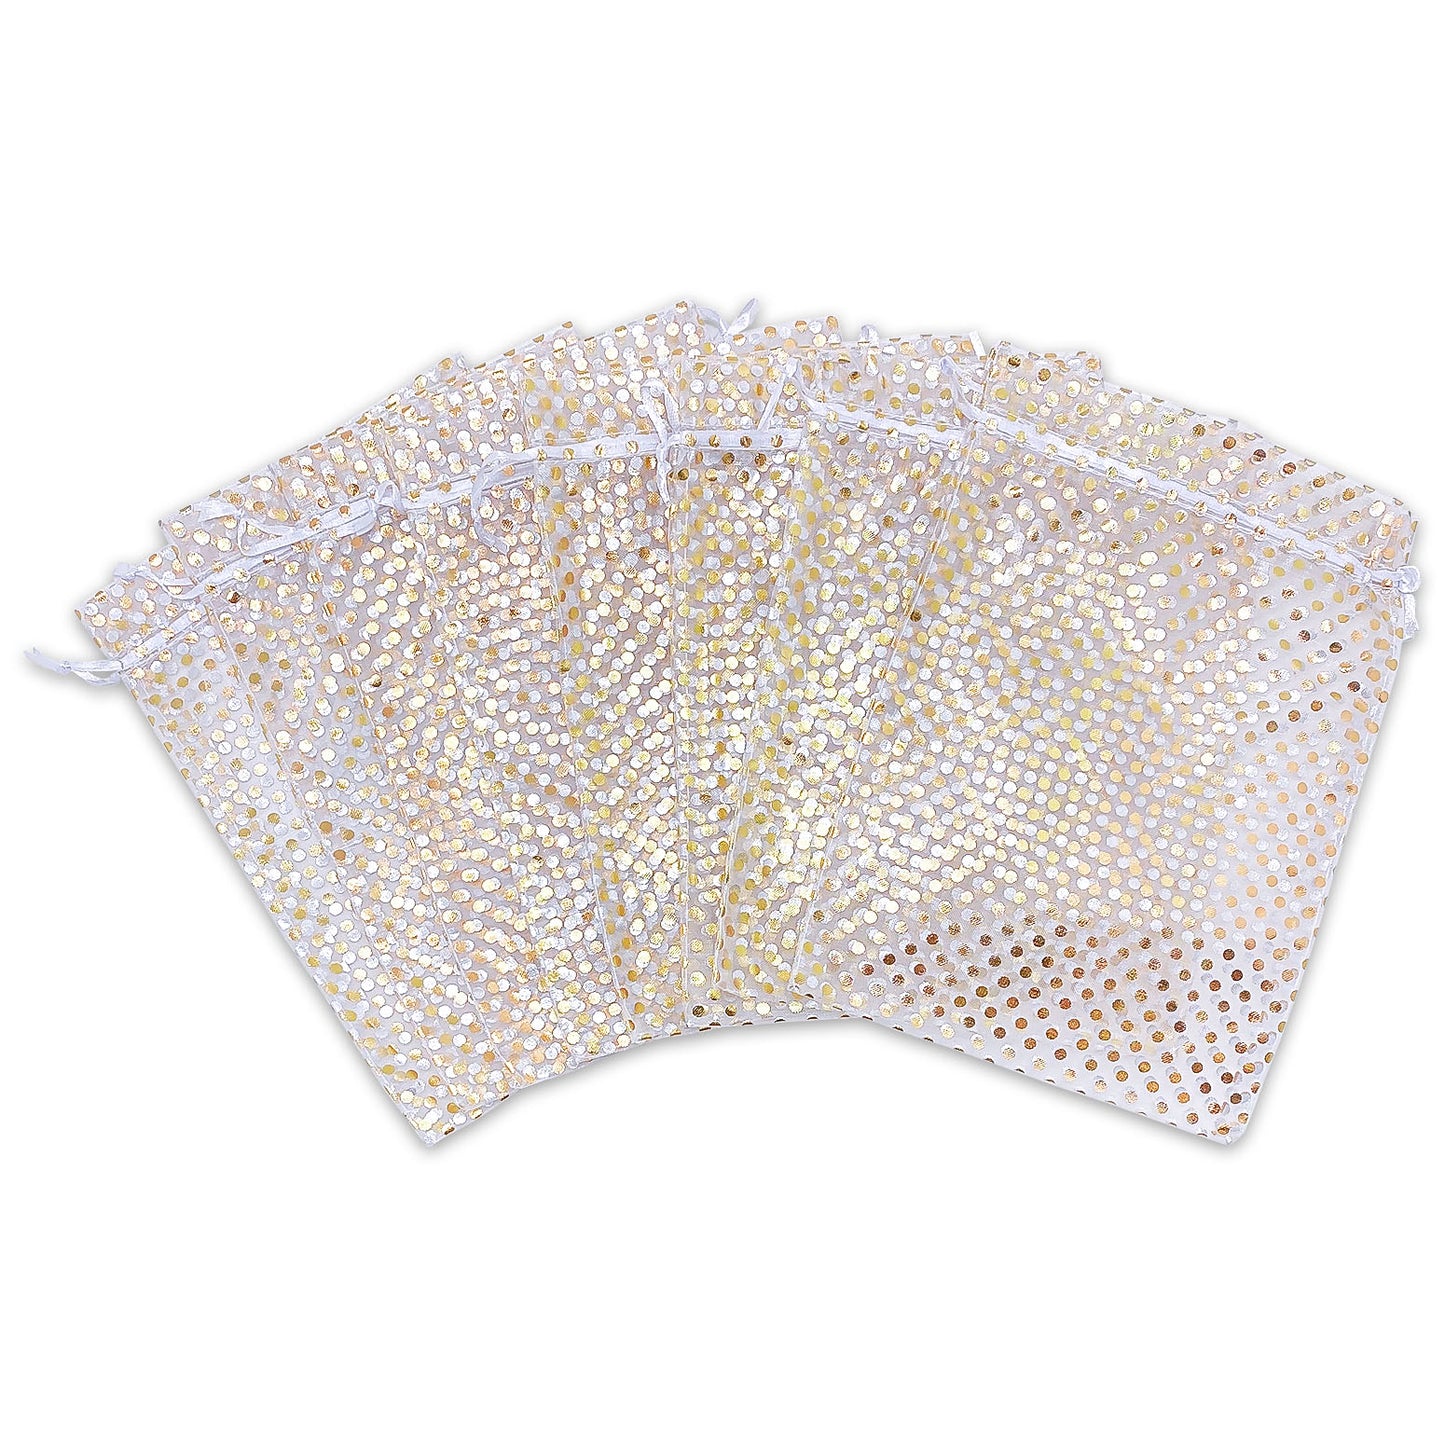 White with Gold Polka Dot Organza Drawstring Pouch Gift Bags